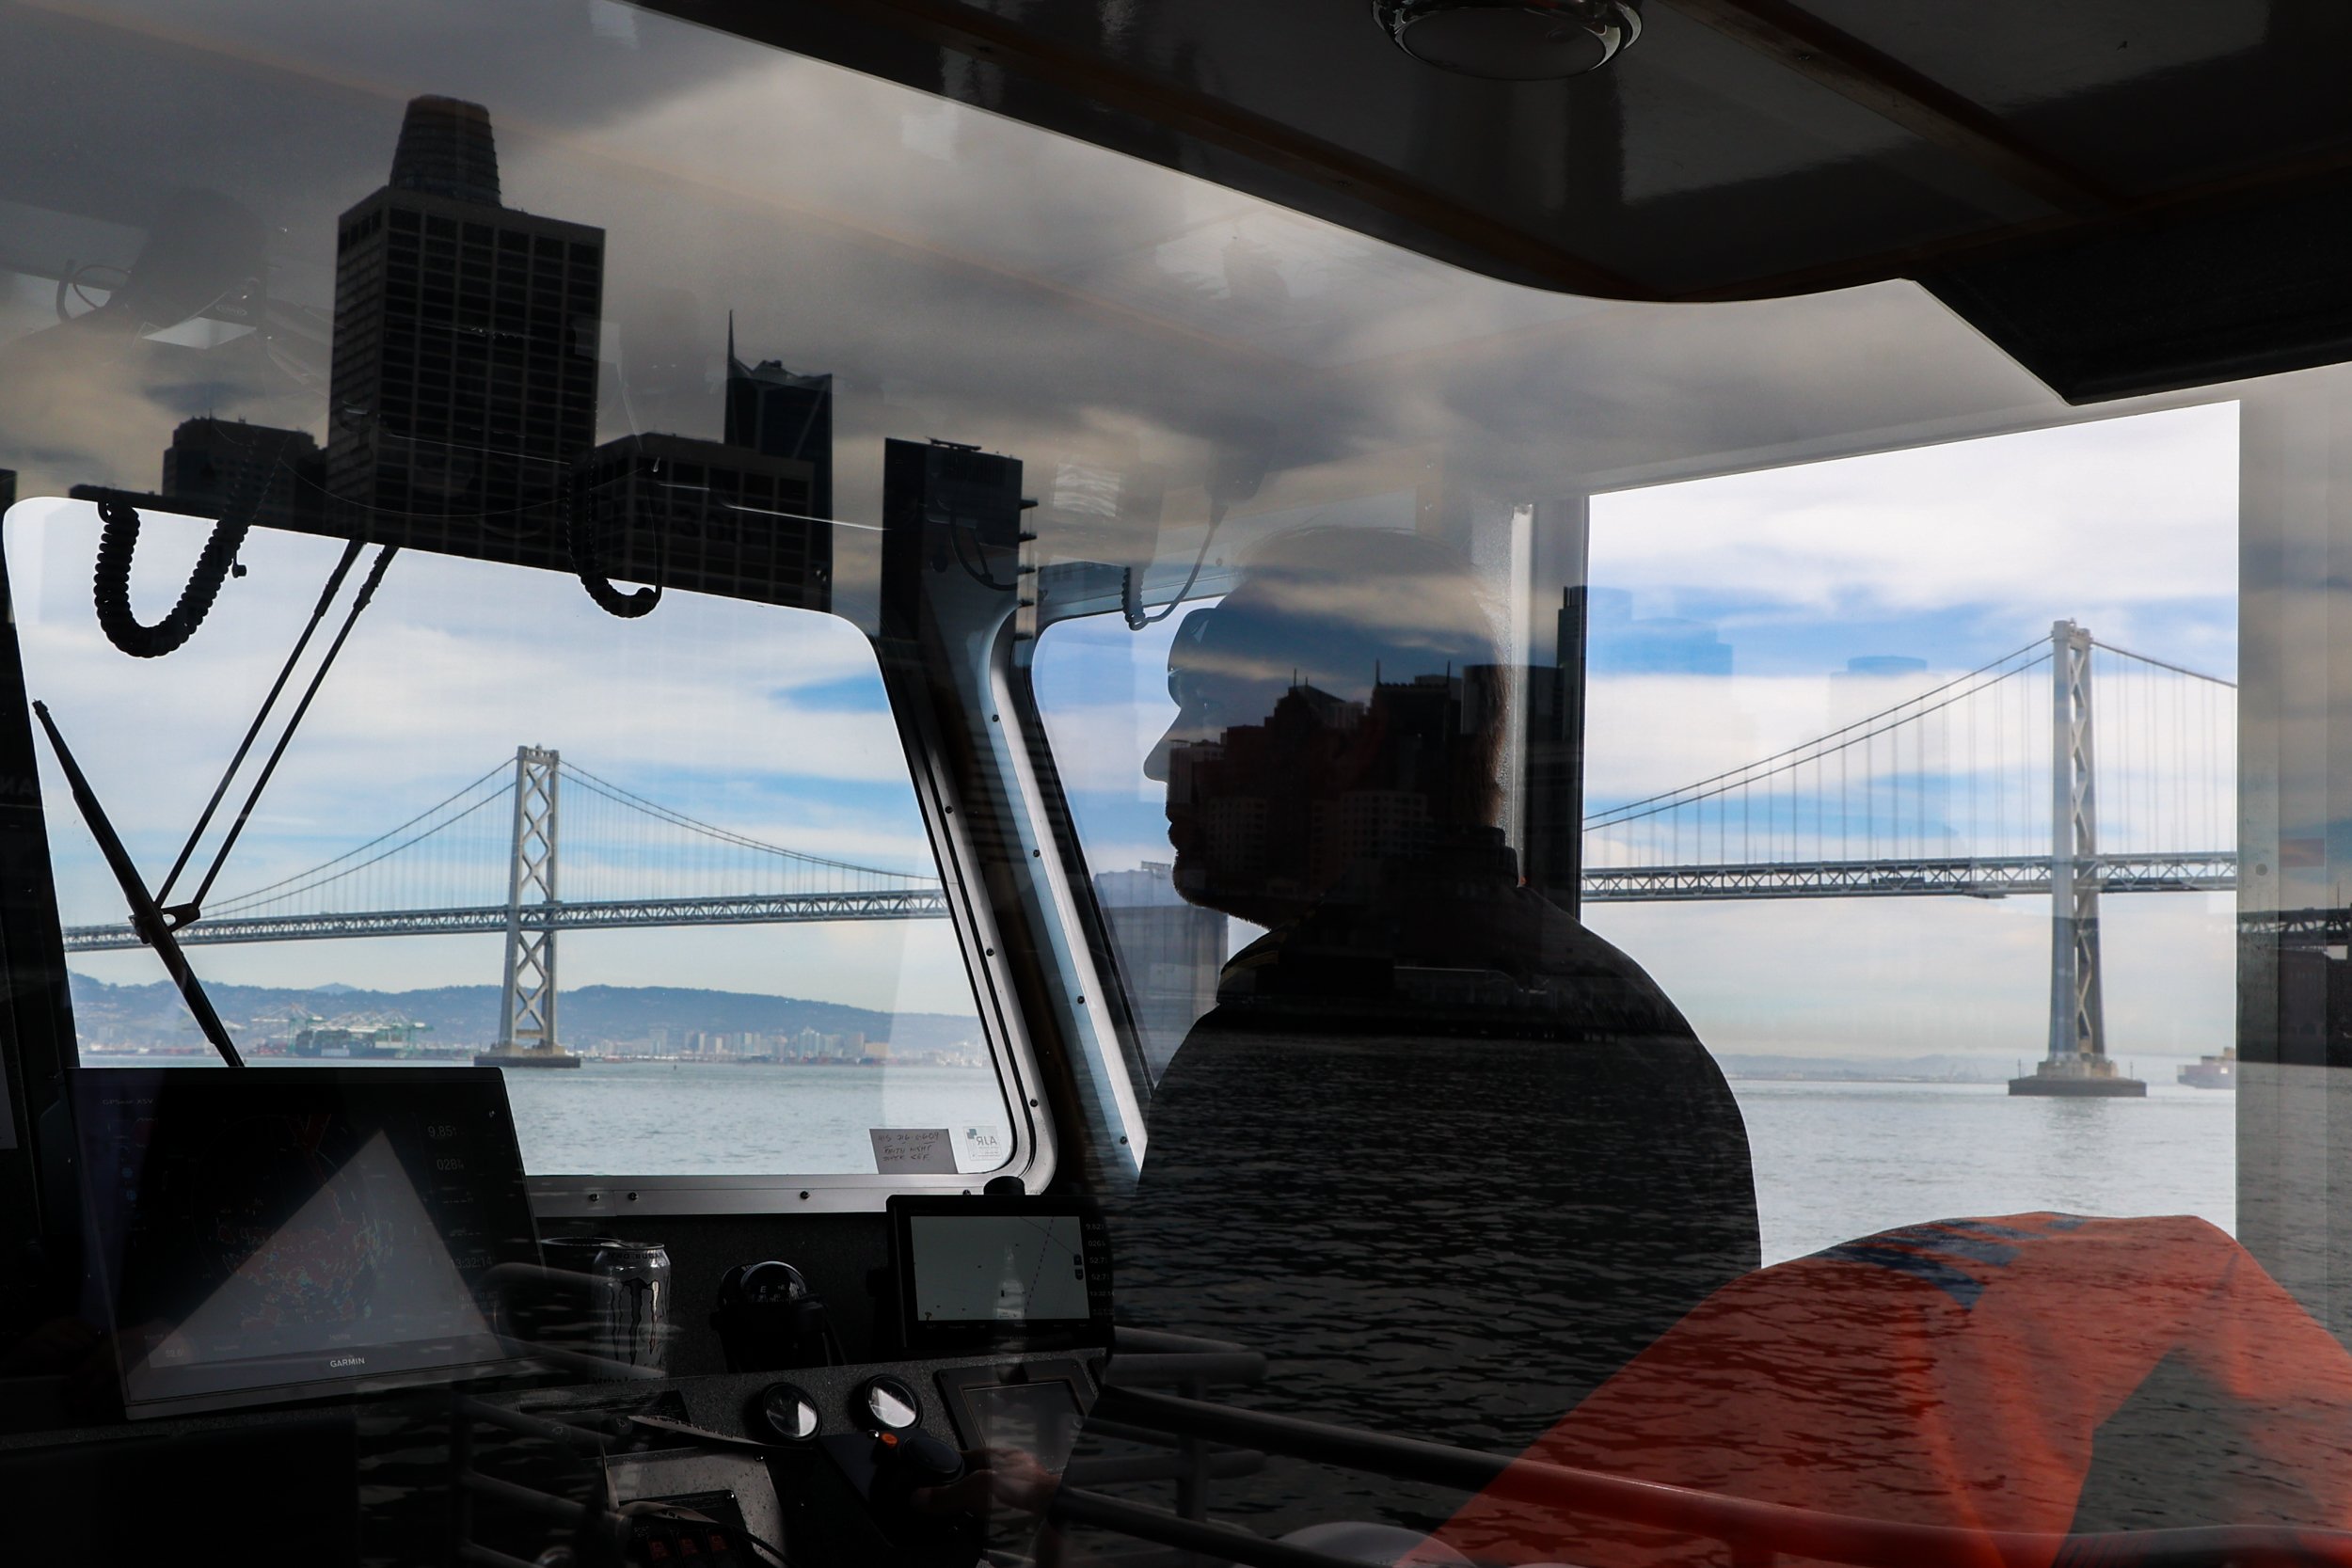  Captain Jeremiah Brazil pilots the Treasure Island ferry through the Bay on March 1, 2022.  “This is my office,” Brazil said, gesturing to the waves under the Bay Bridge. “I just love this job.” 